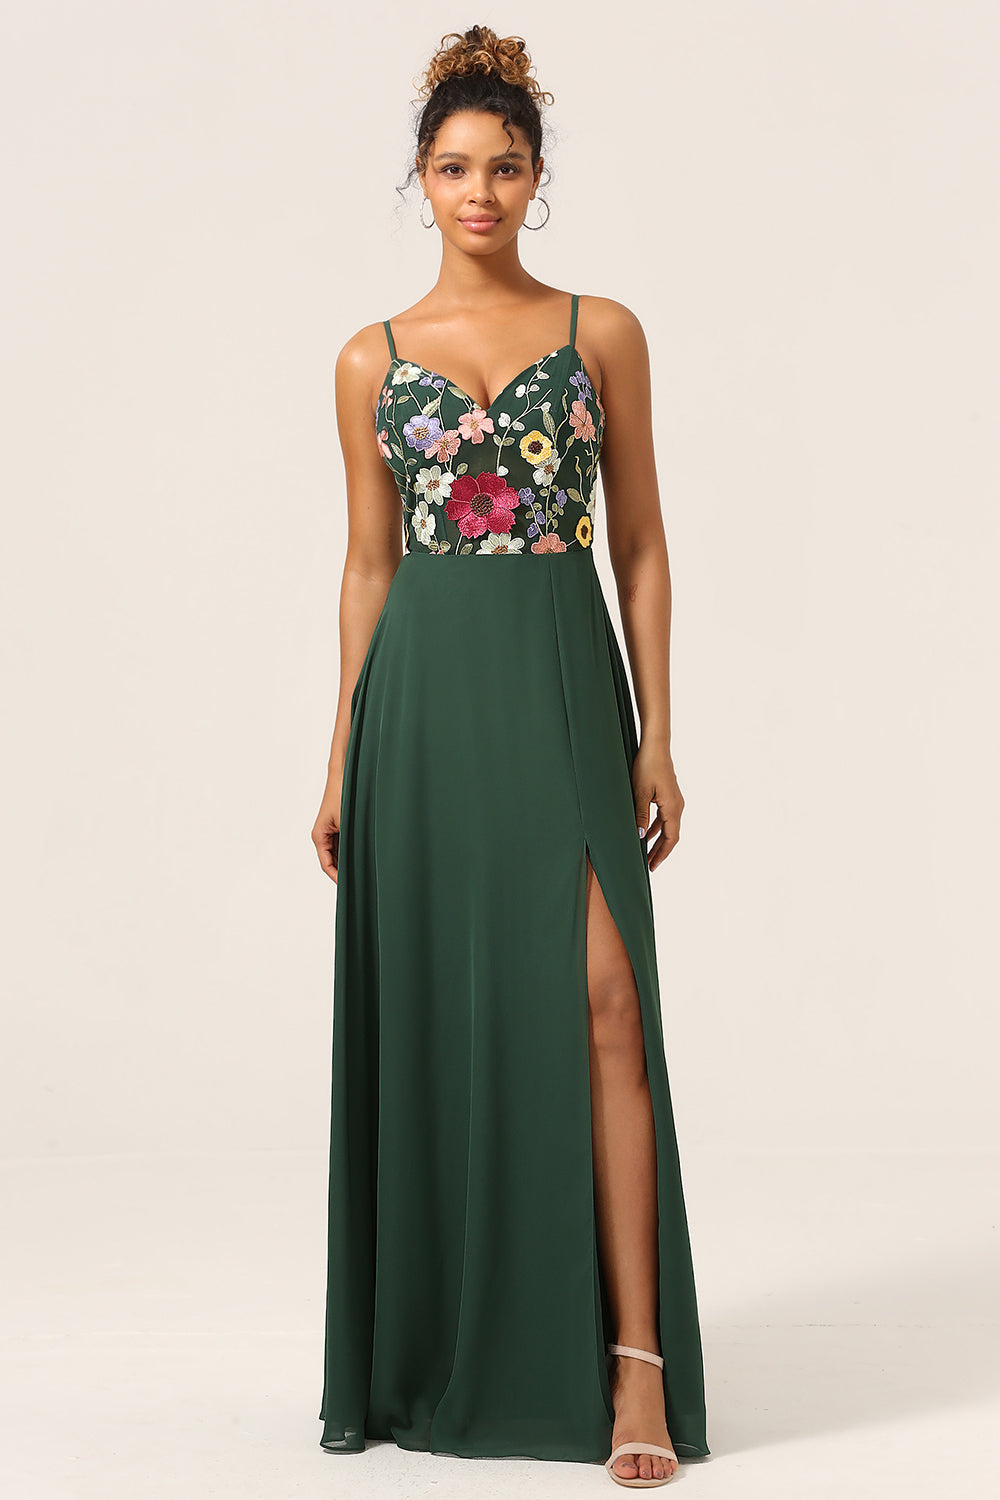 Beauty A-Line Spaghetti Straps Dark Green Long Bridesmaid Dress with 3D Flowers